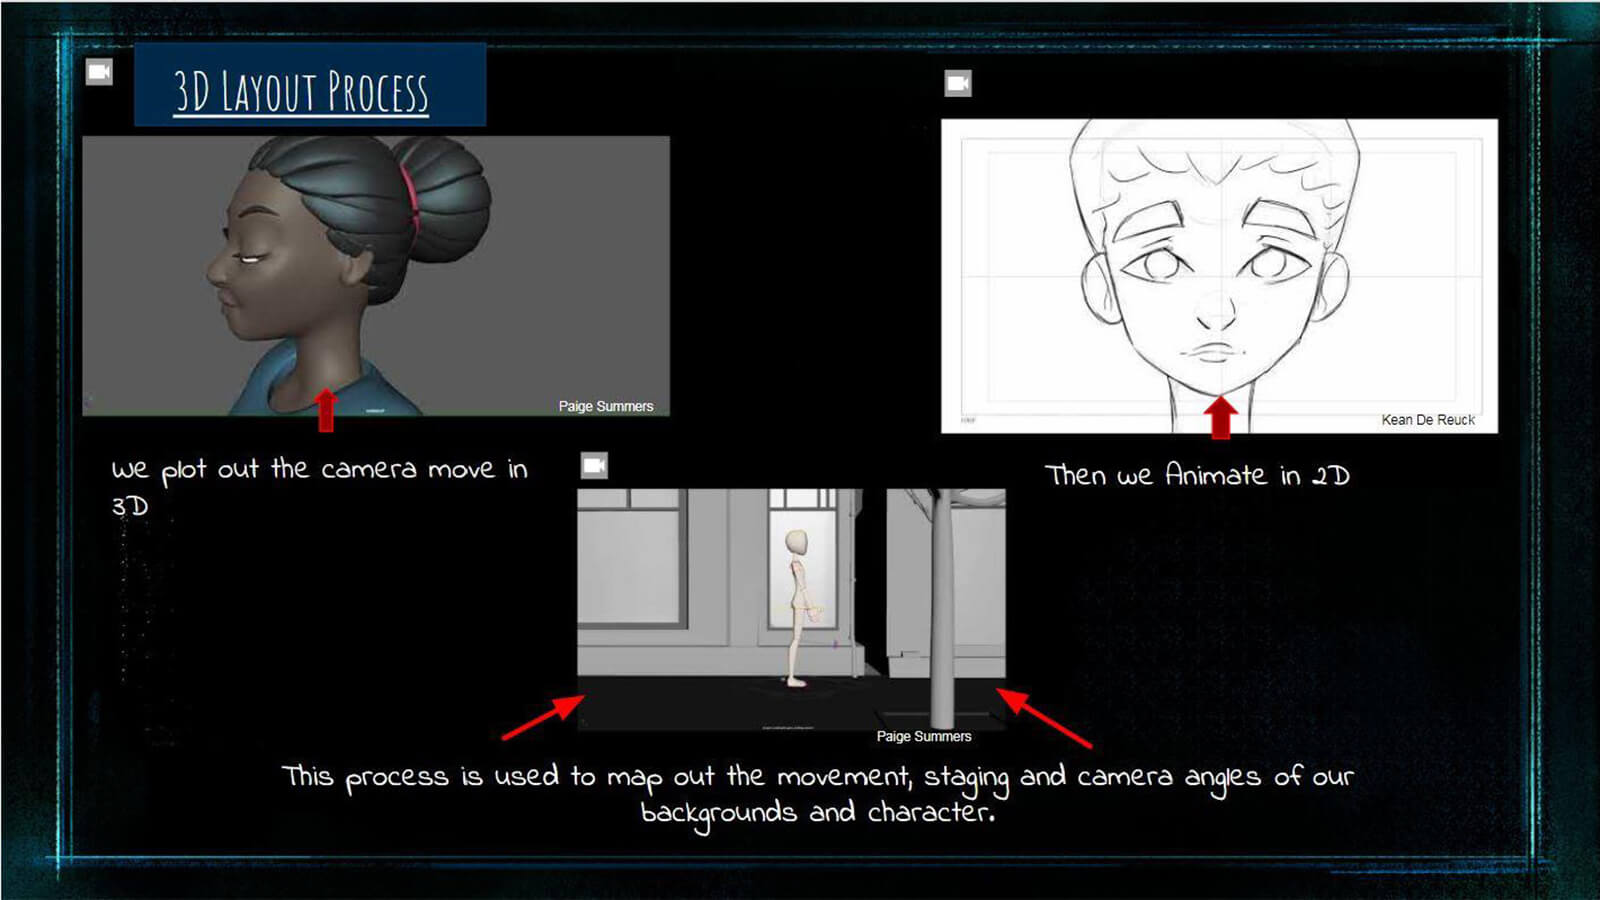 A "3D Layout Process" slide, showing the way the team incorporated 3D camera movement into their 2D animated film.